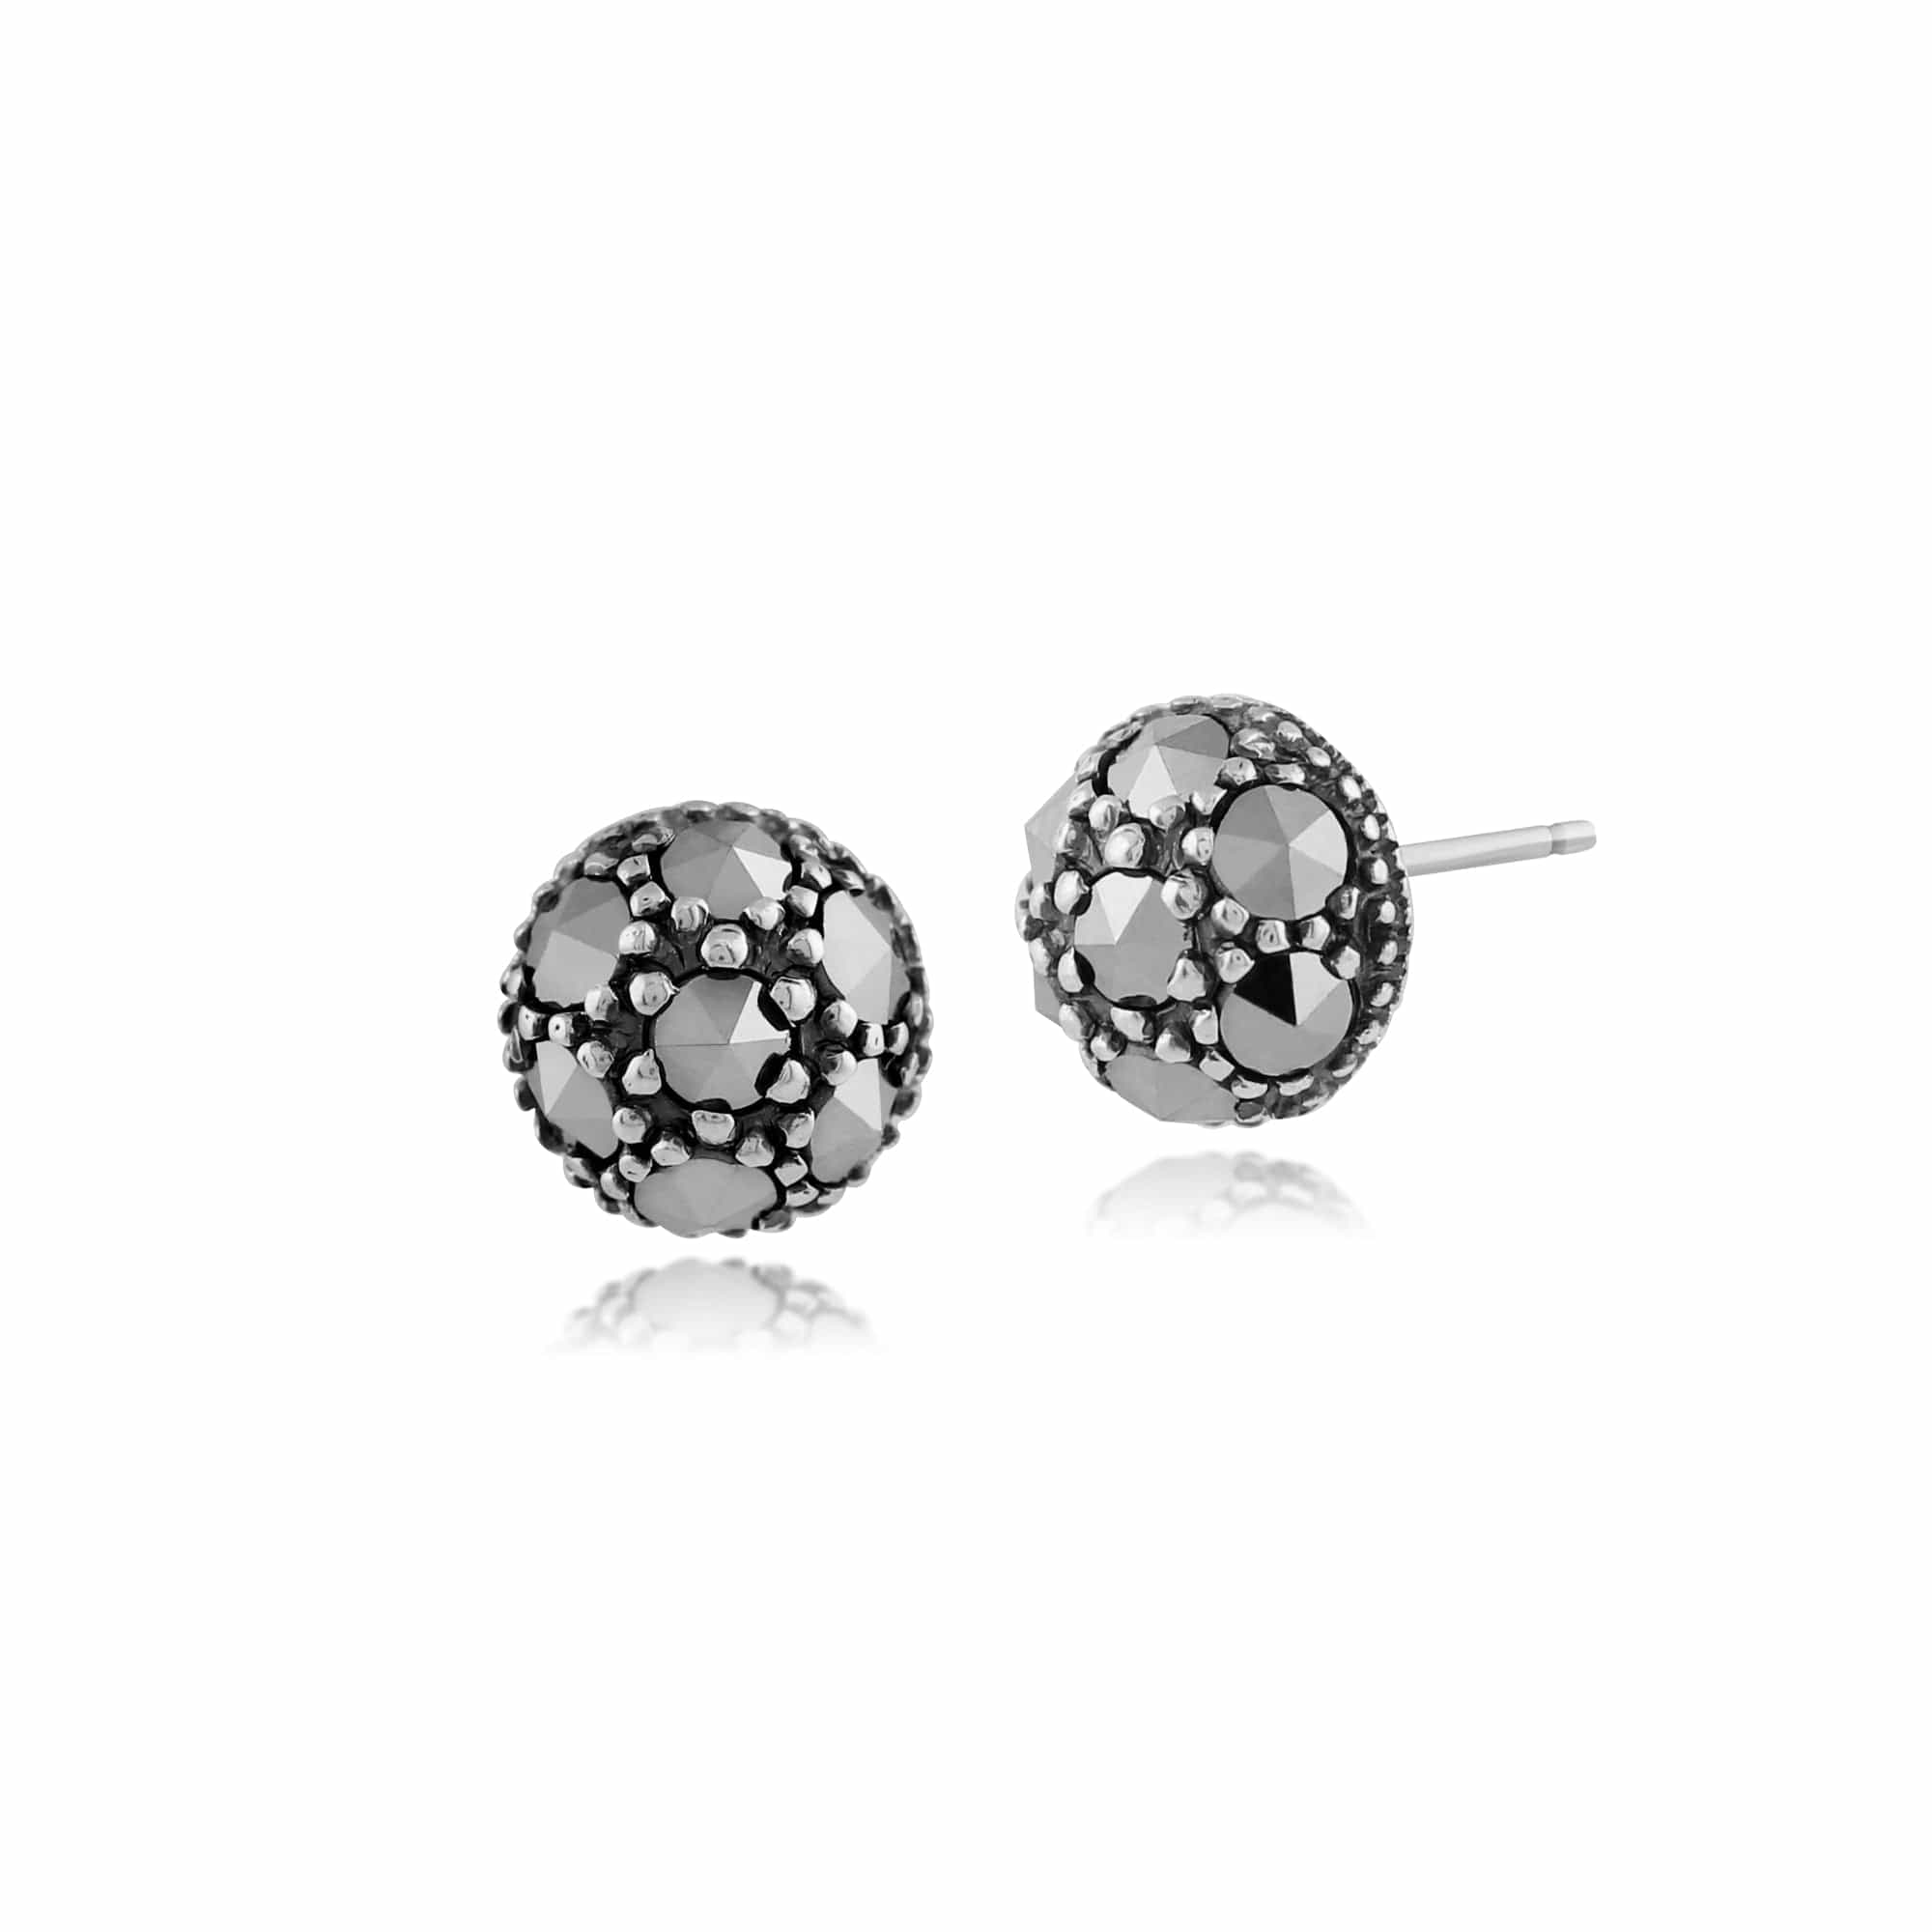 Classic Round Marcasite Stud Earrings in 925 Sterling Silver - Gemondo